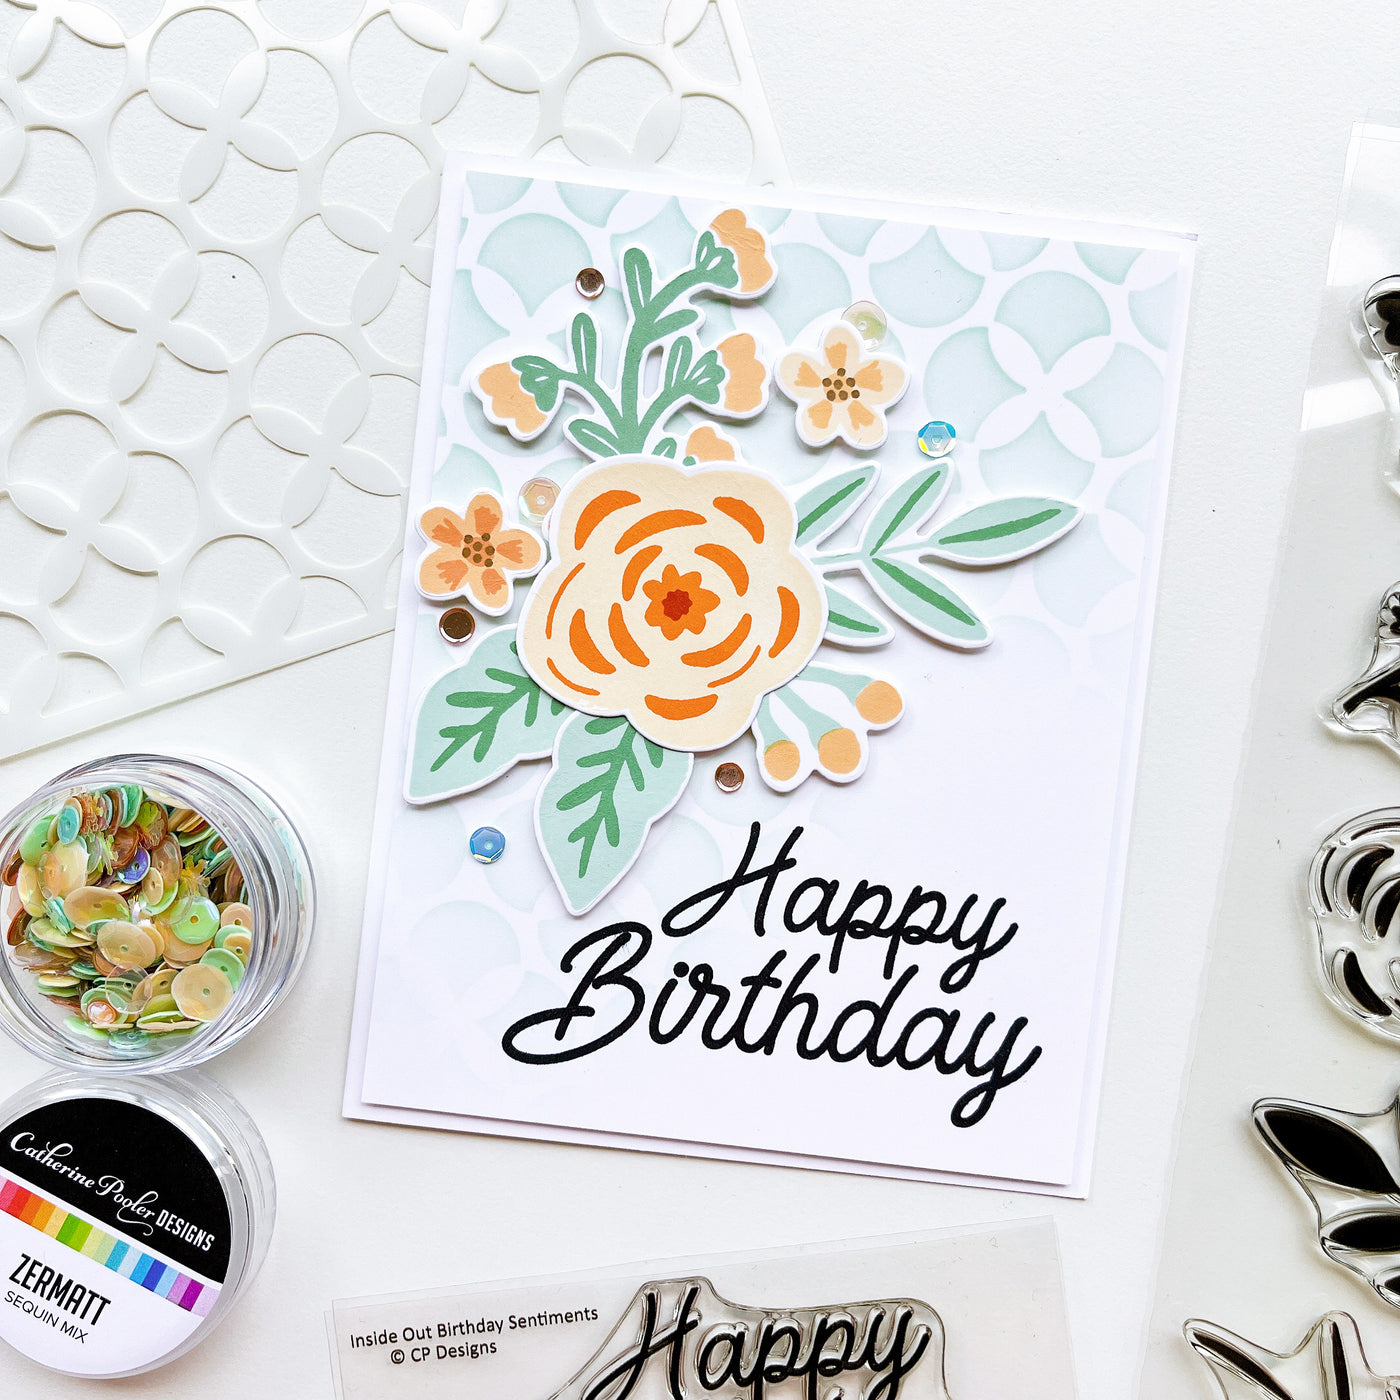 Inside Out Birthday Sentiments Stamp Set Catherine Pooler Designs